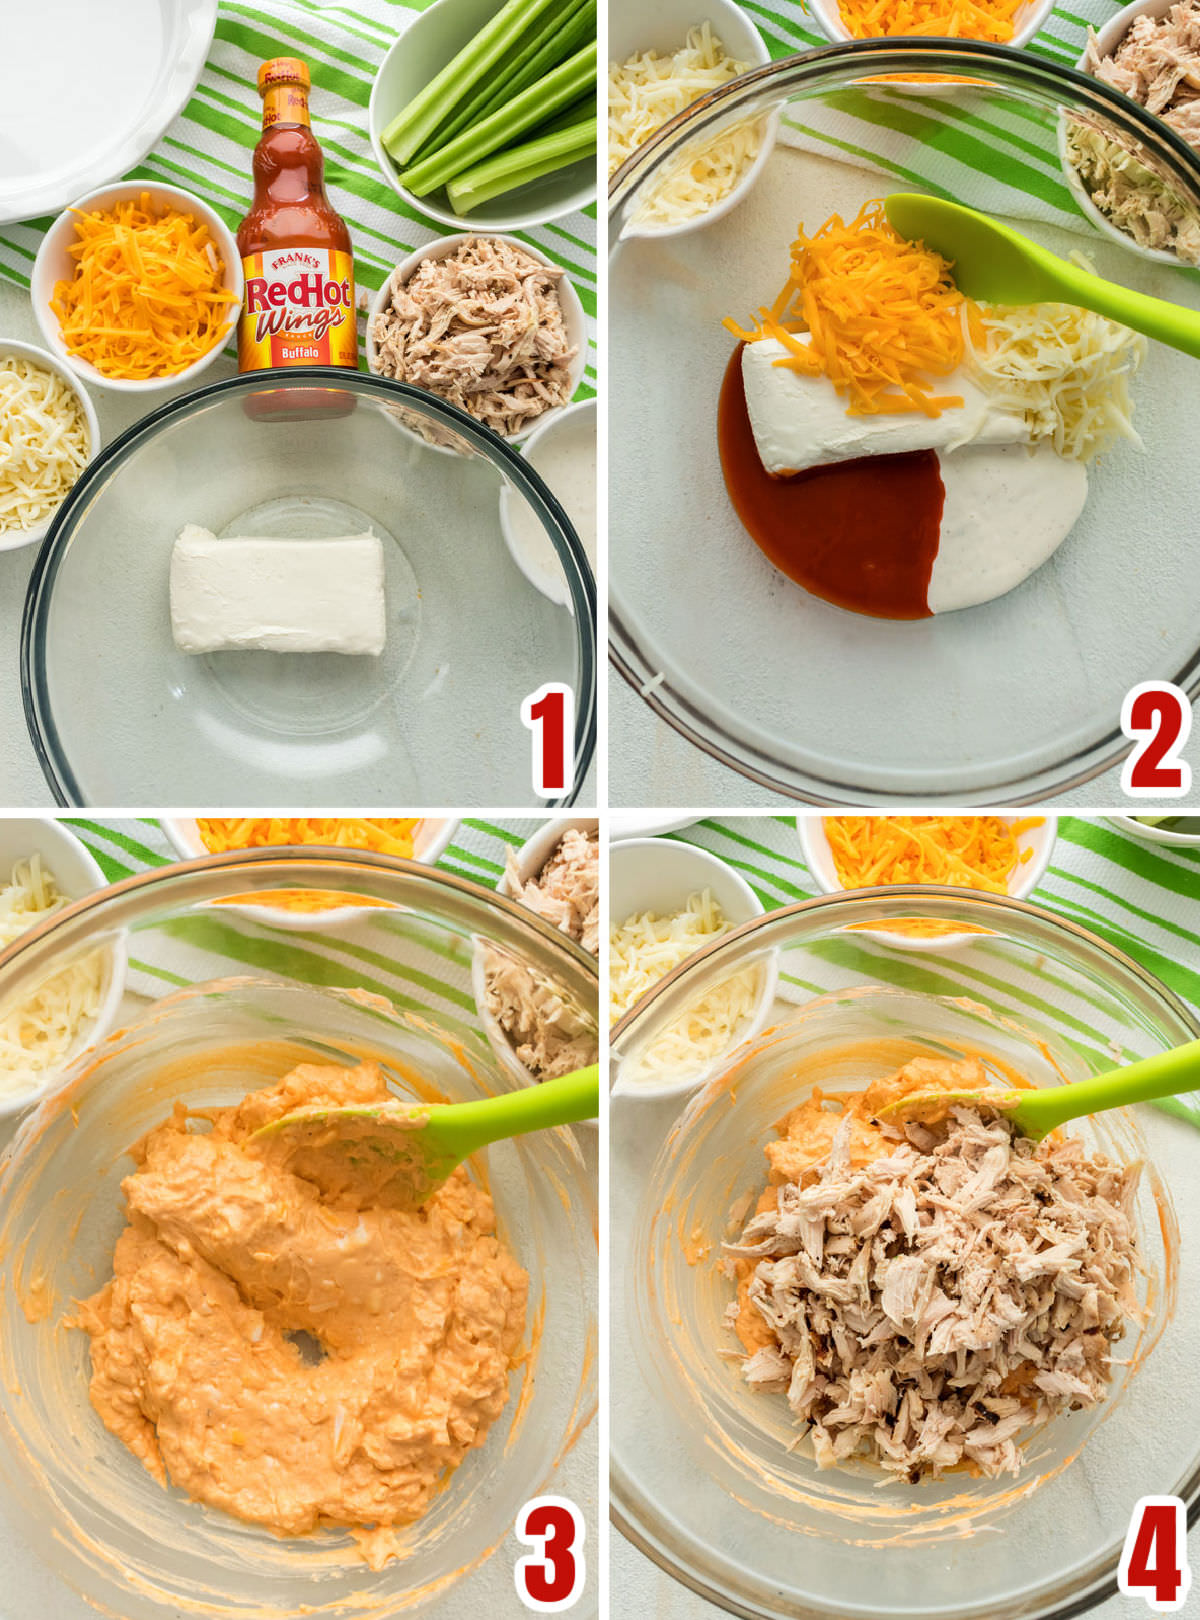 Collage image showing how to make the Buffalo Chicken Dip mixture.